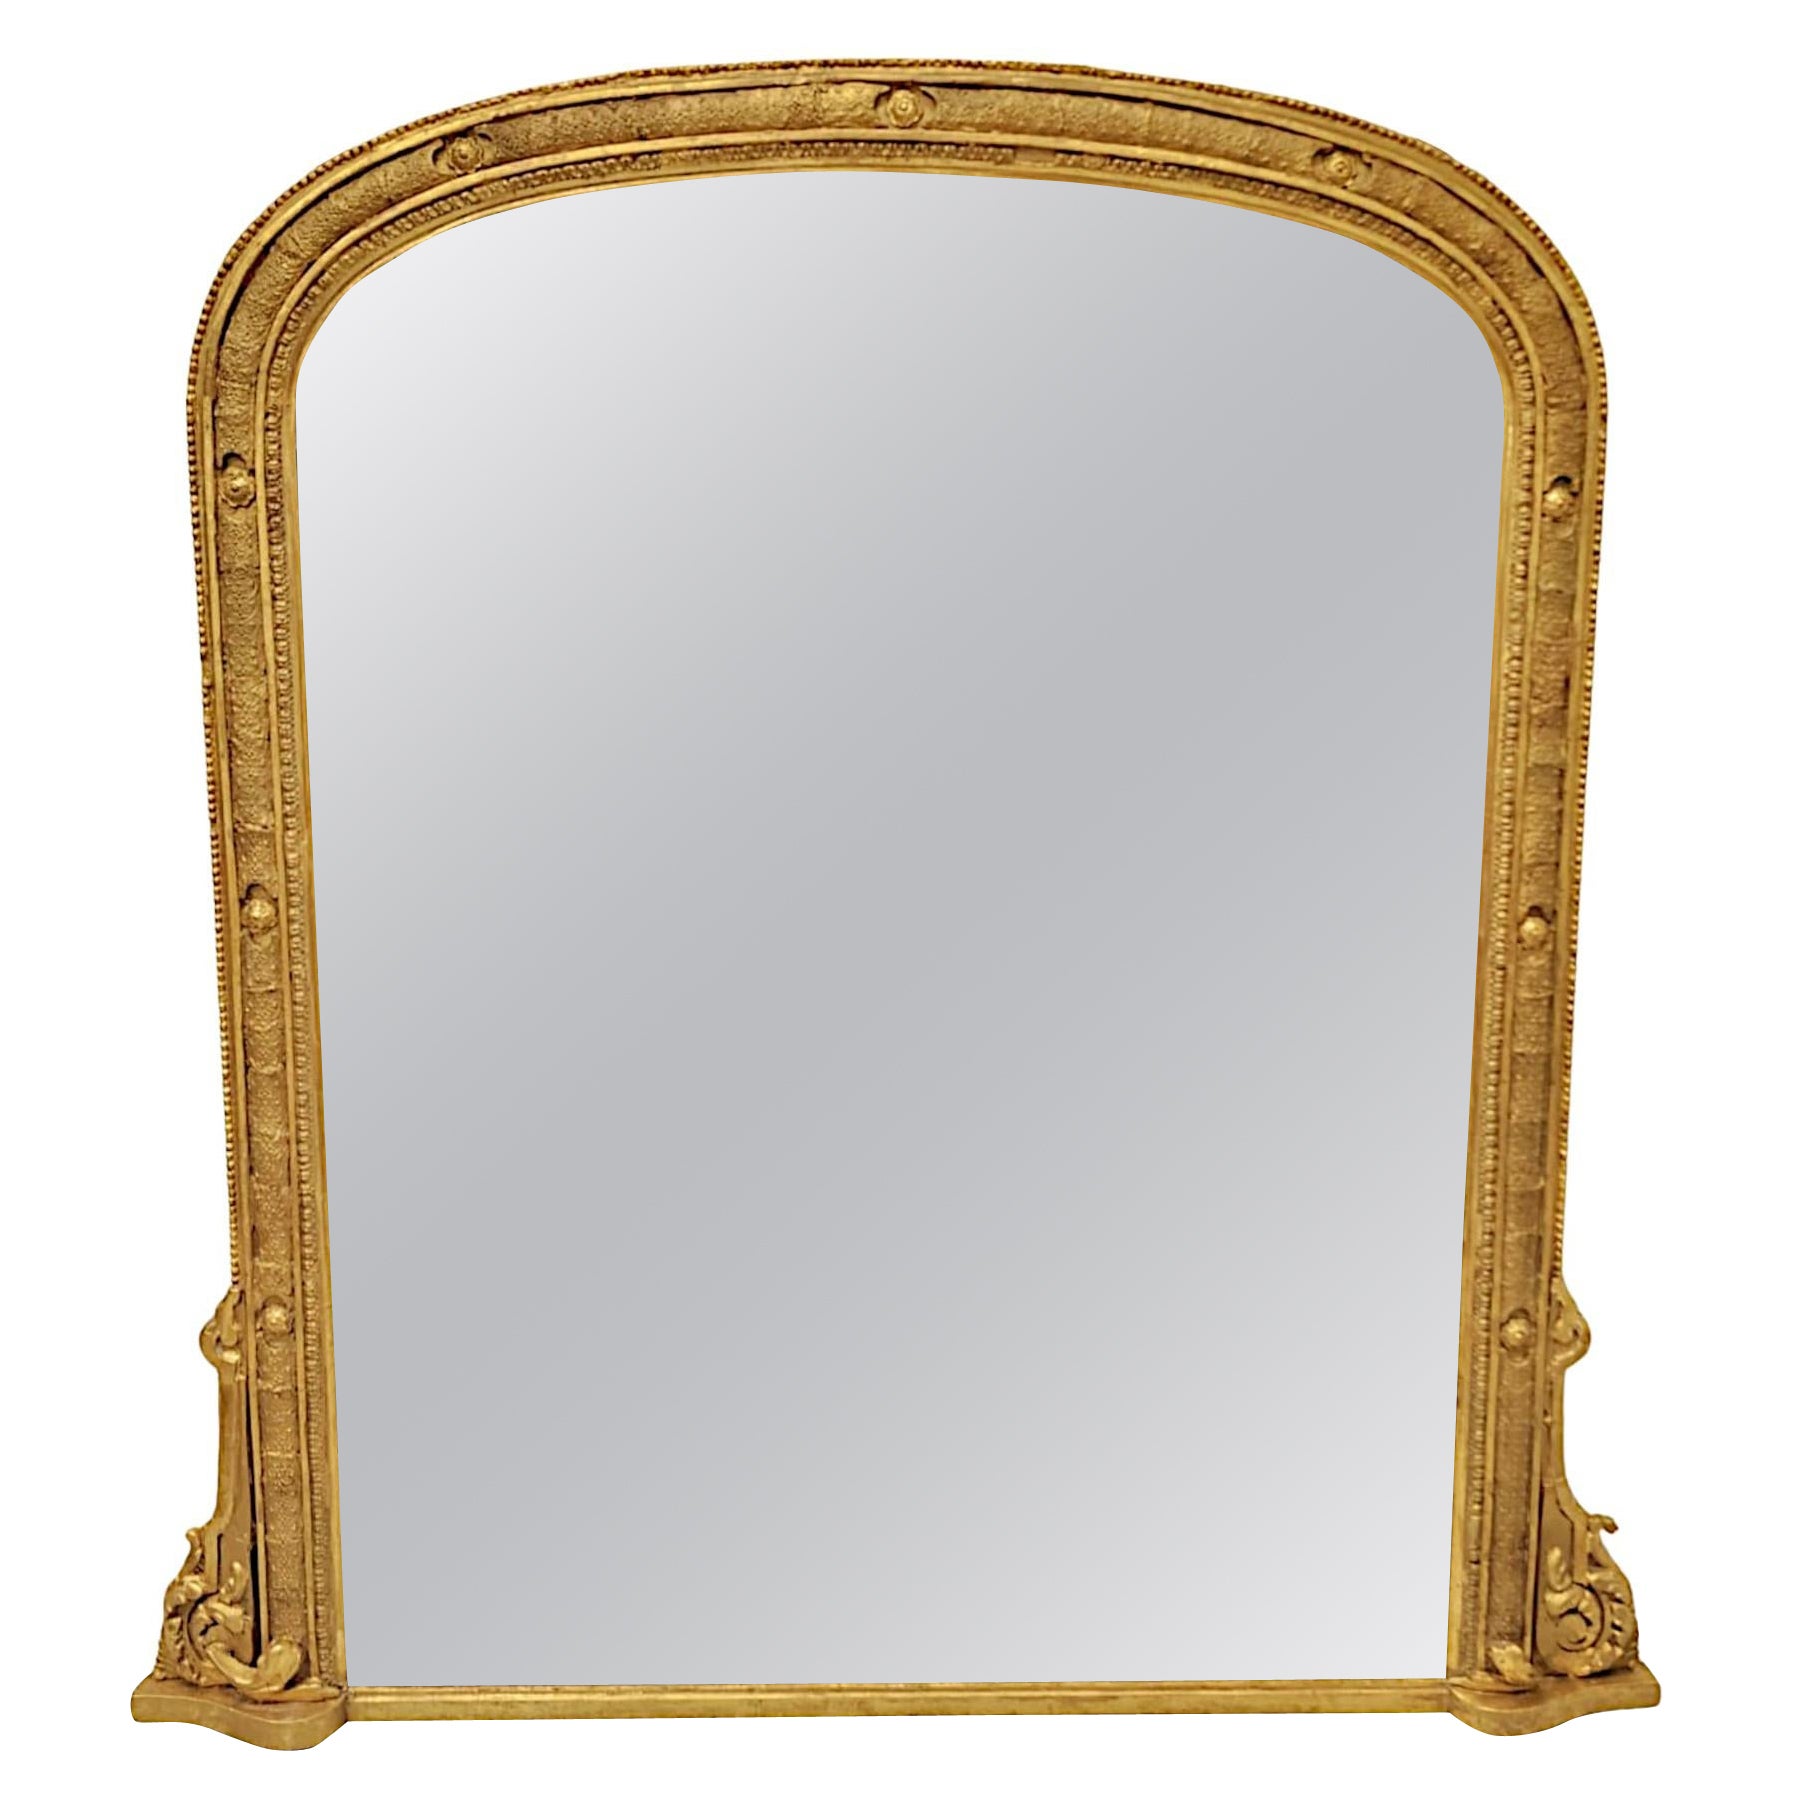 A Very Fine 19th Century Giltwood Overmantel Mirror